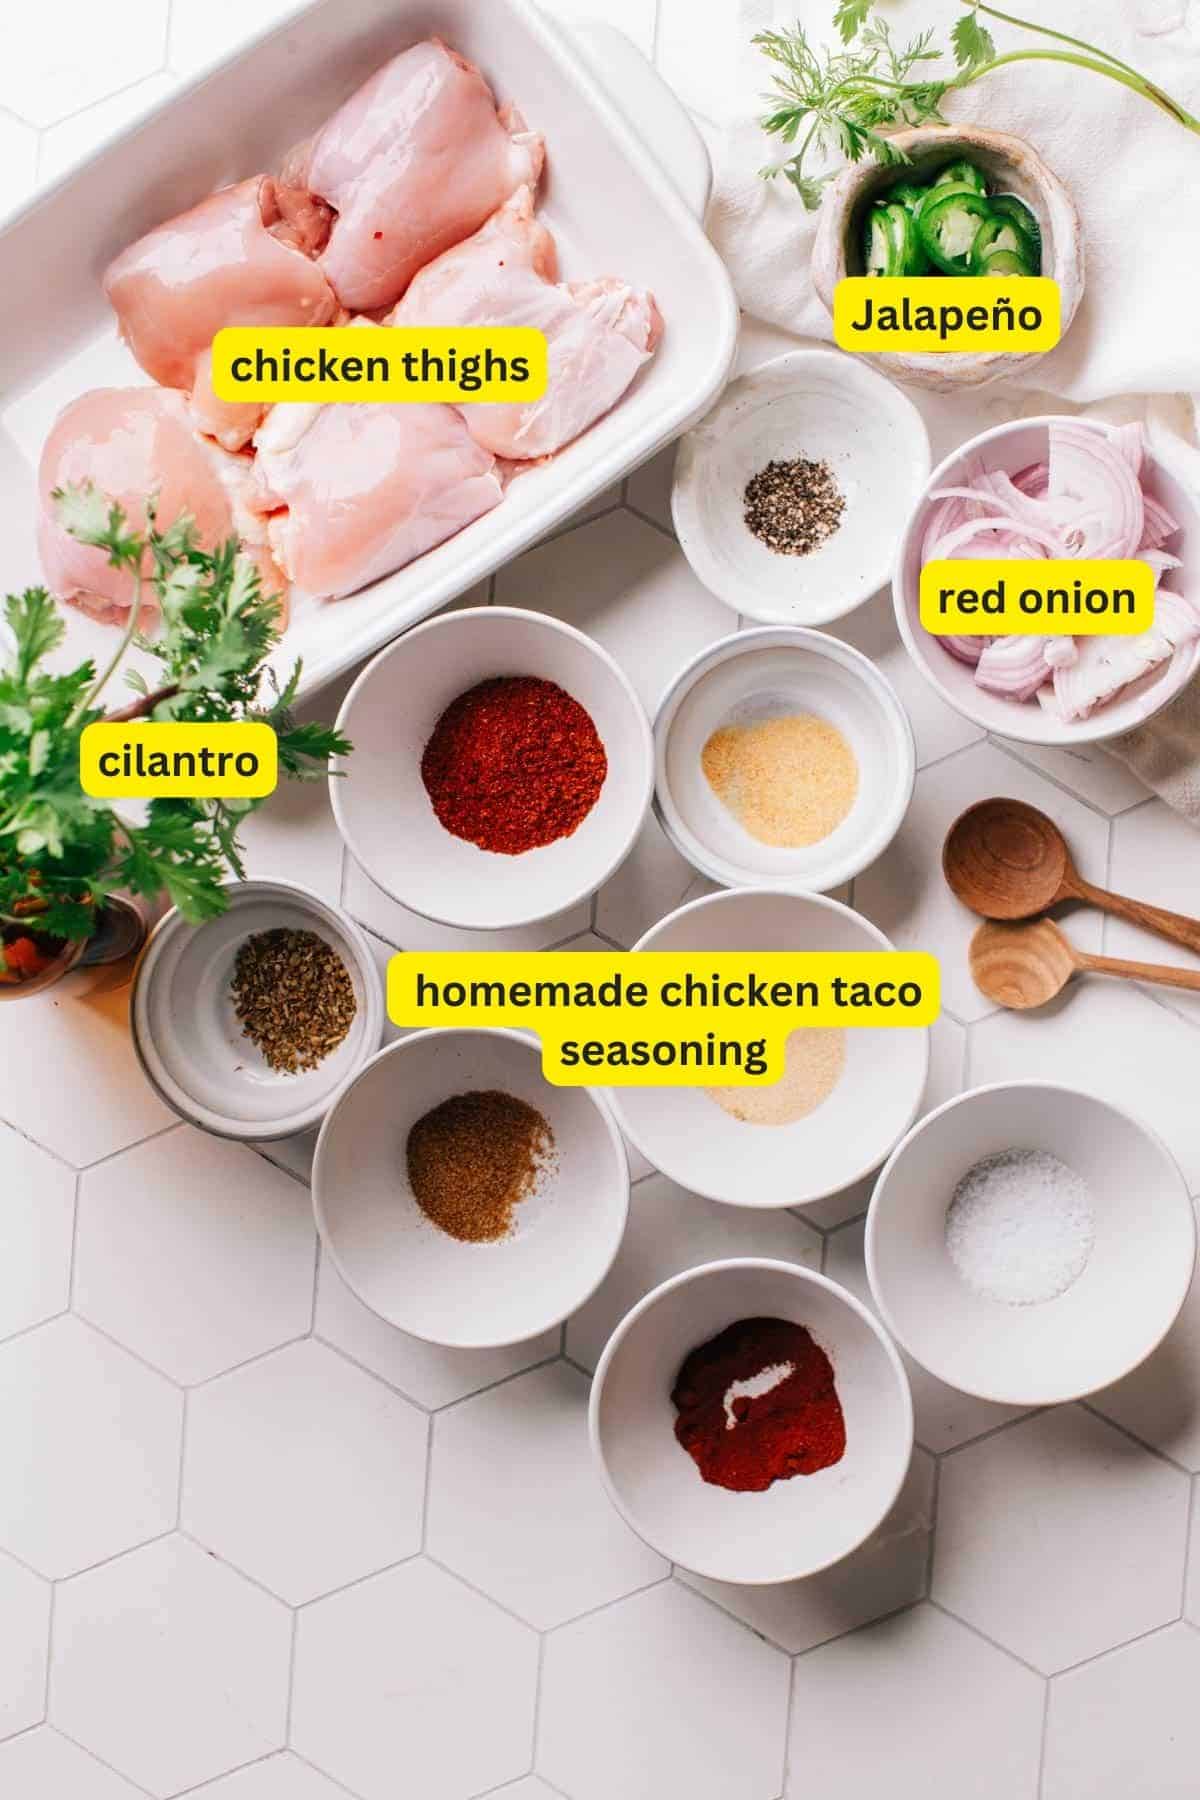 Ingredients for chicken street tacos on a kitchen countertop including chicken thighs, jalapeno, red onion, cilantro and homemade chicken taco seasoning.